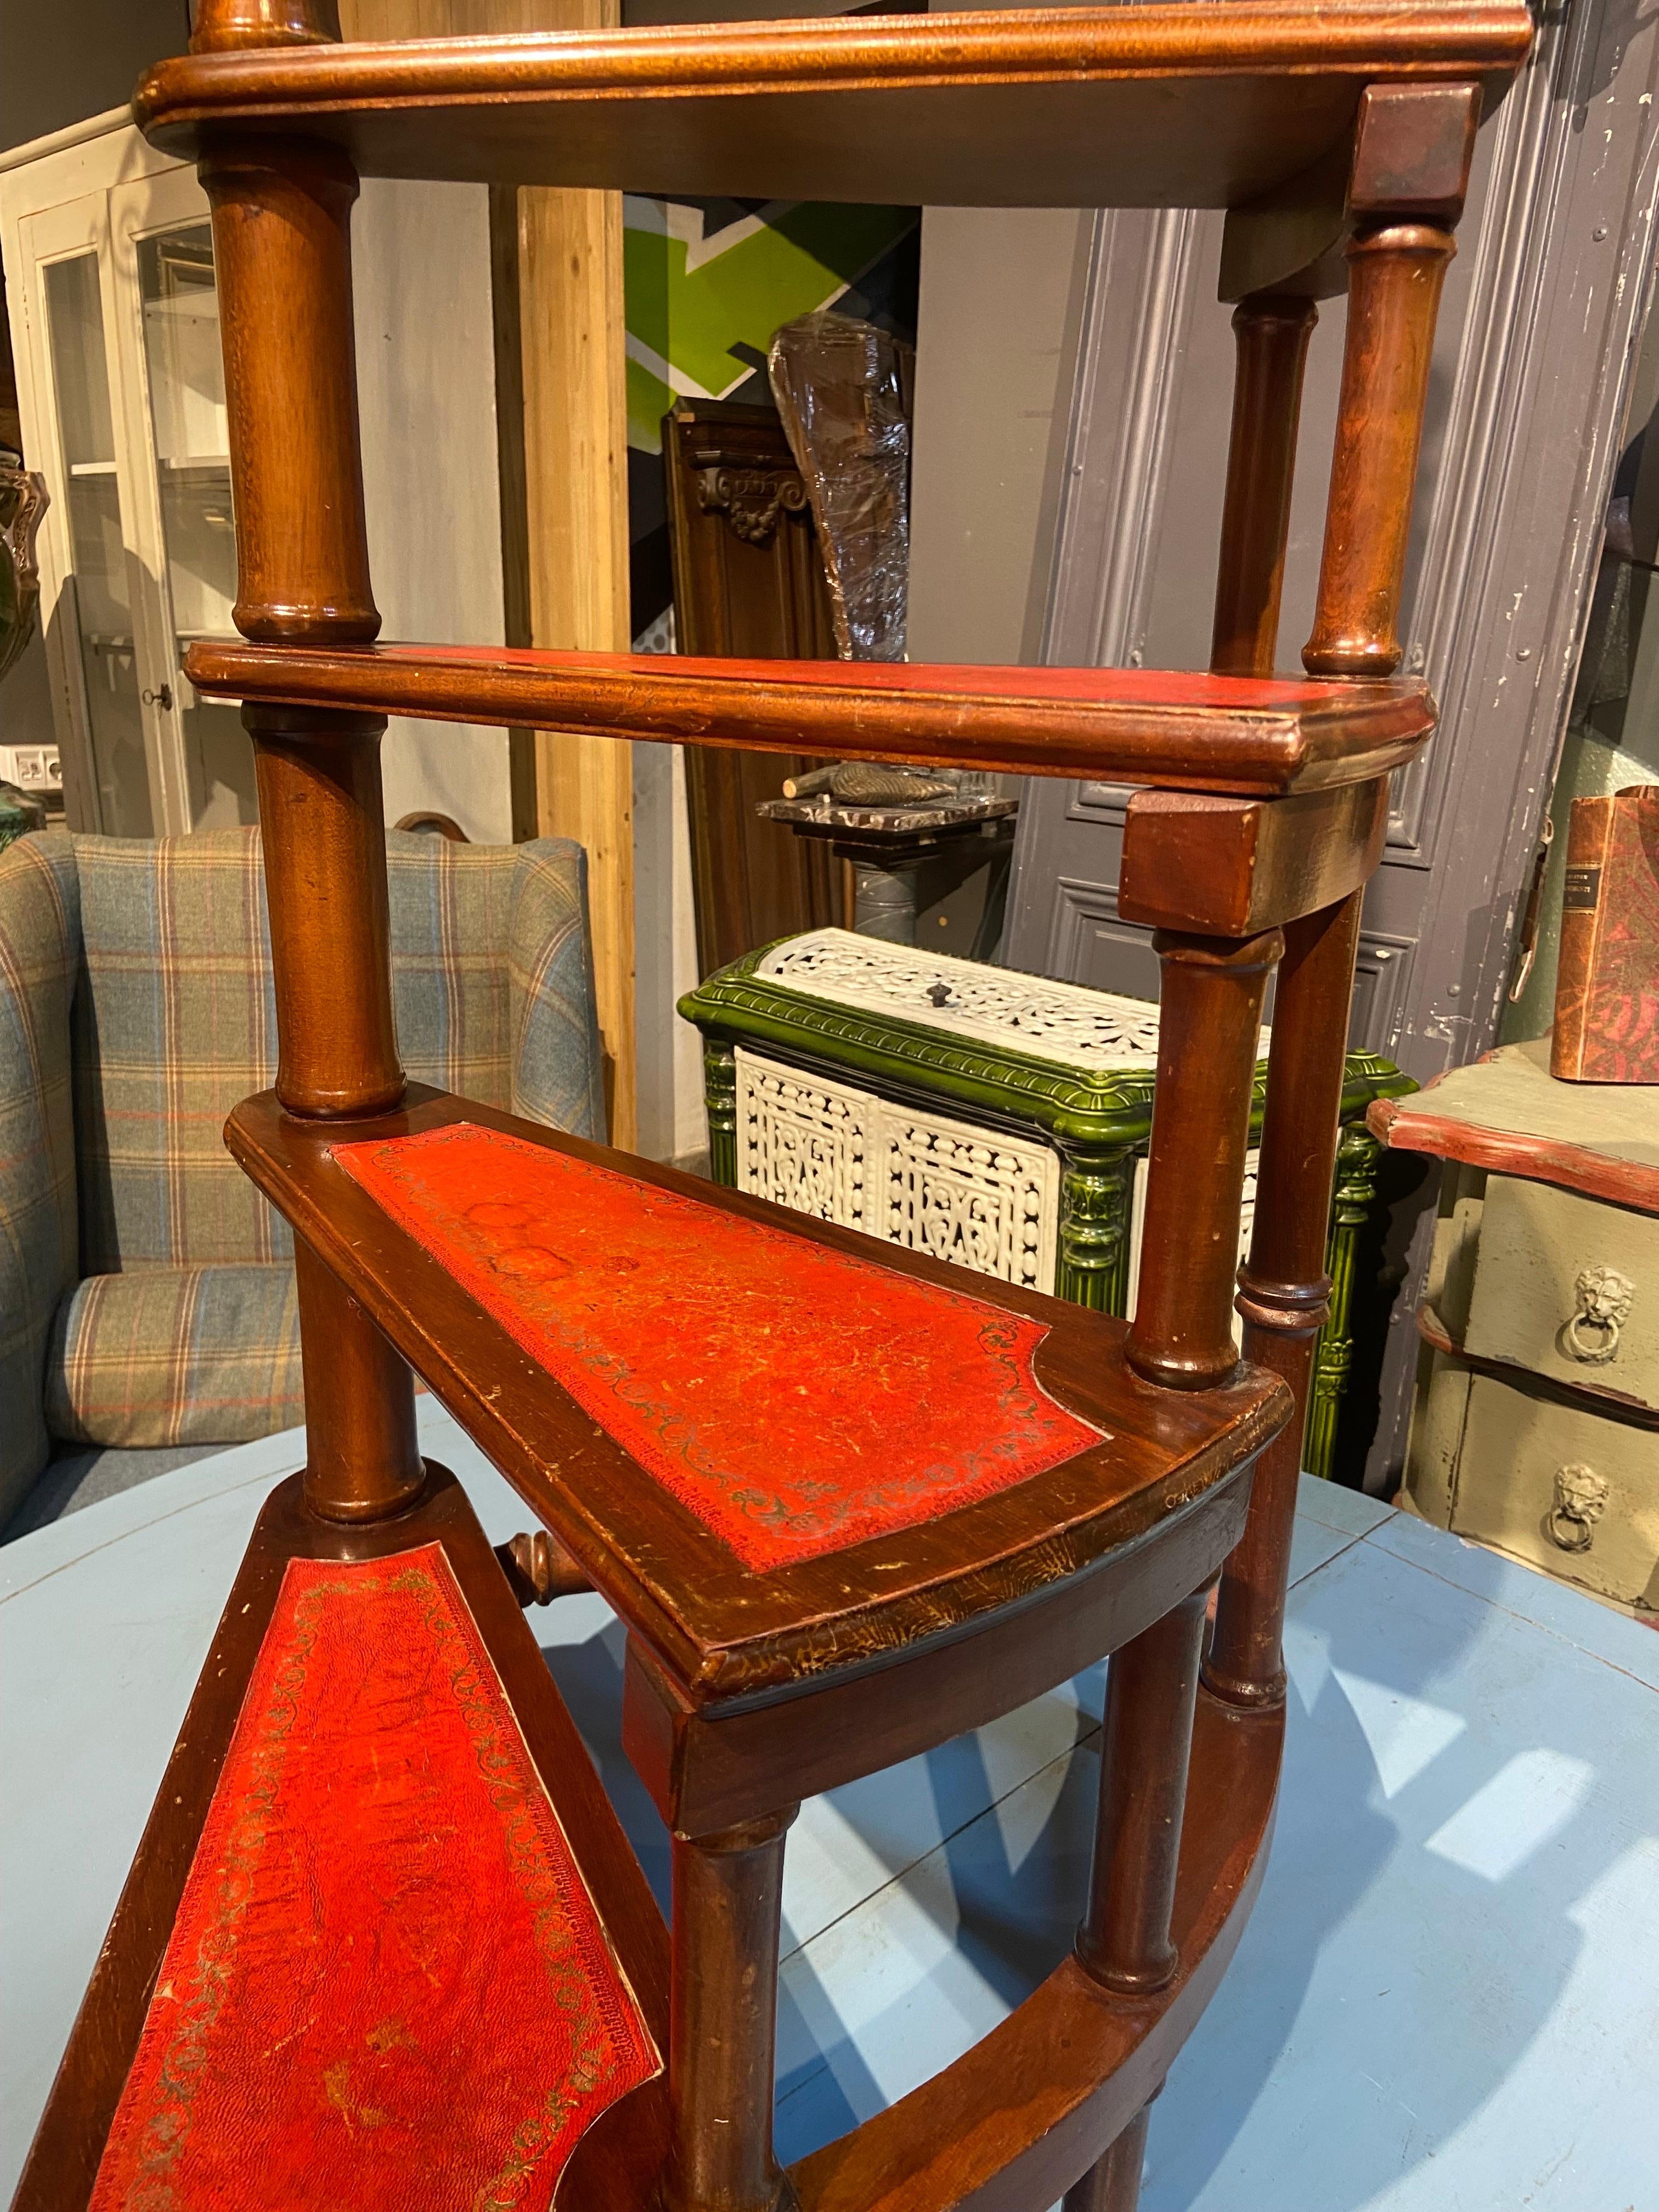 20th Century Antique round library ladder hand made of mahogany in England.

Solid wood covered with red leather at the four-stage with a long turned handle. Very stable and robust. Rare body shape. England 20th century.